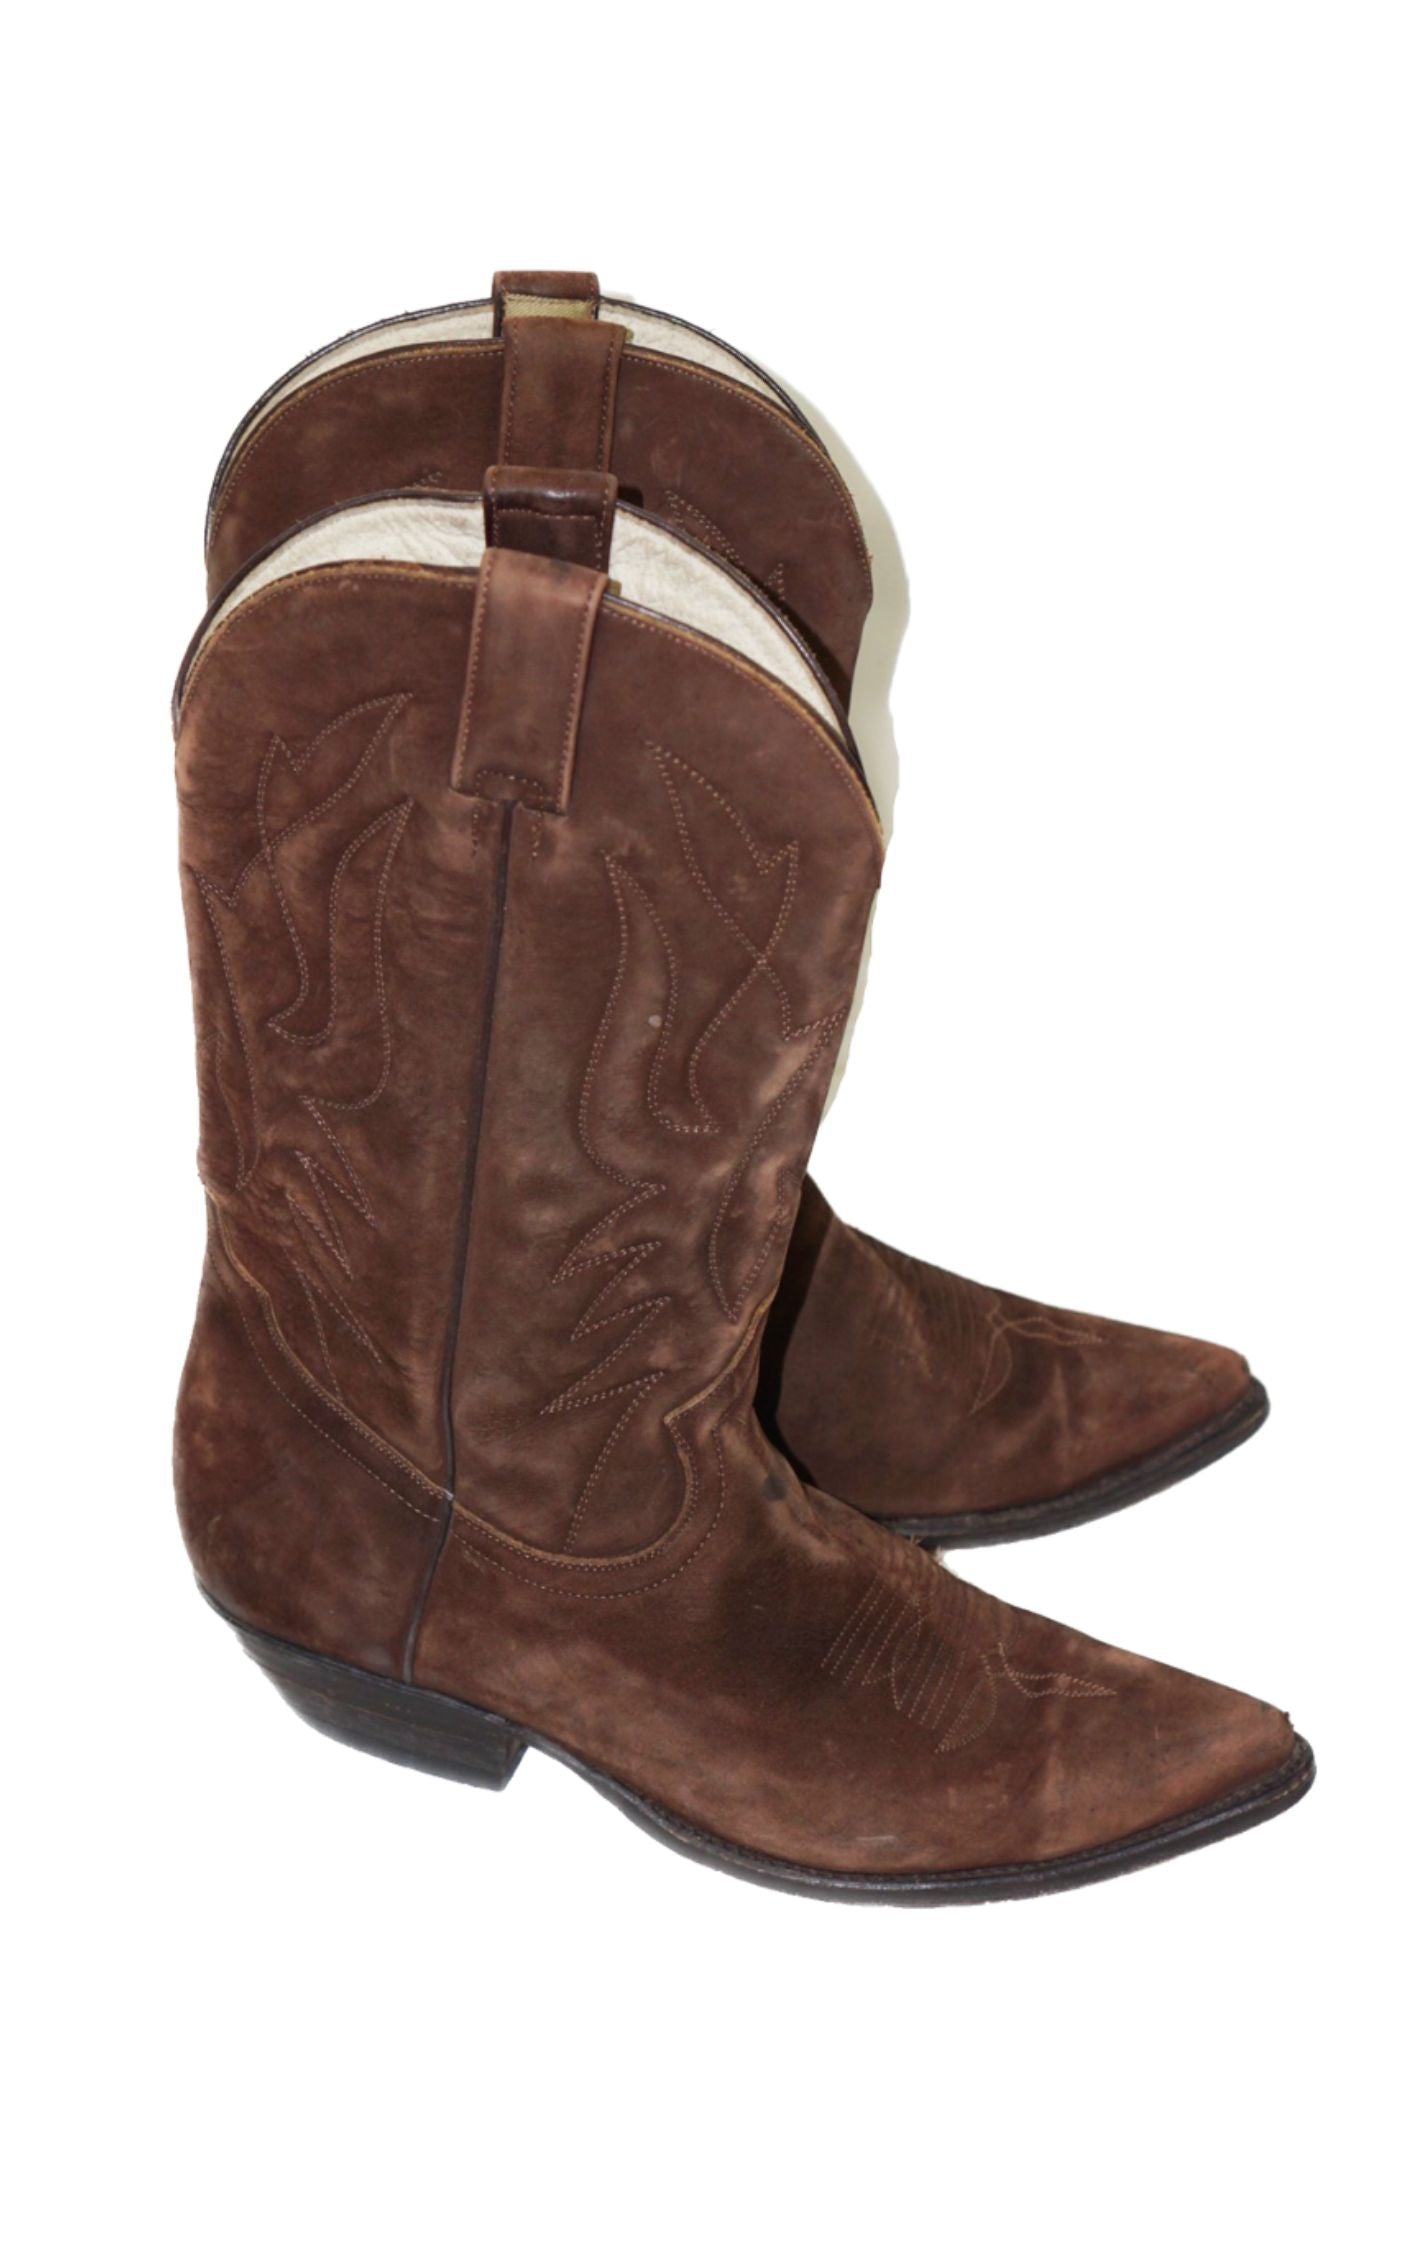 CRAZY BULL Brown Western Cowboy Boots resellum